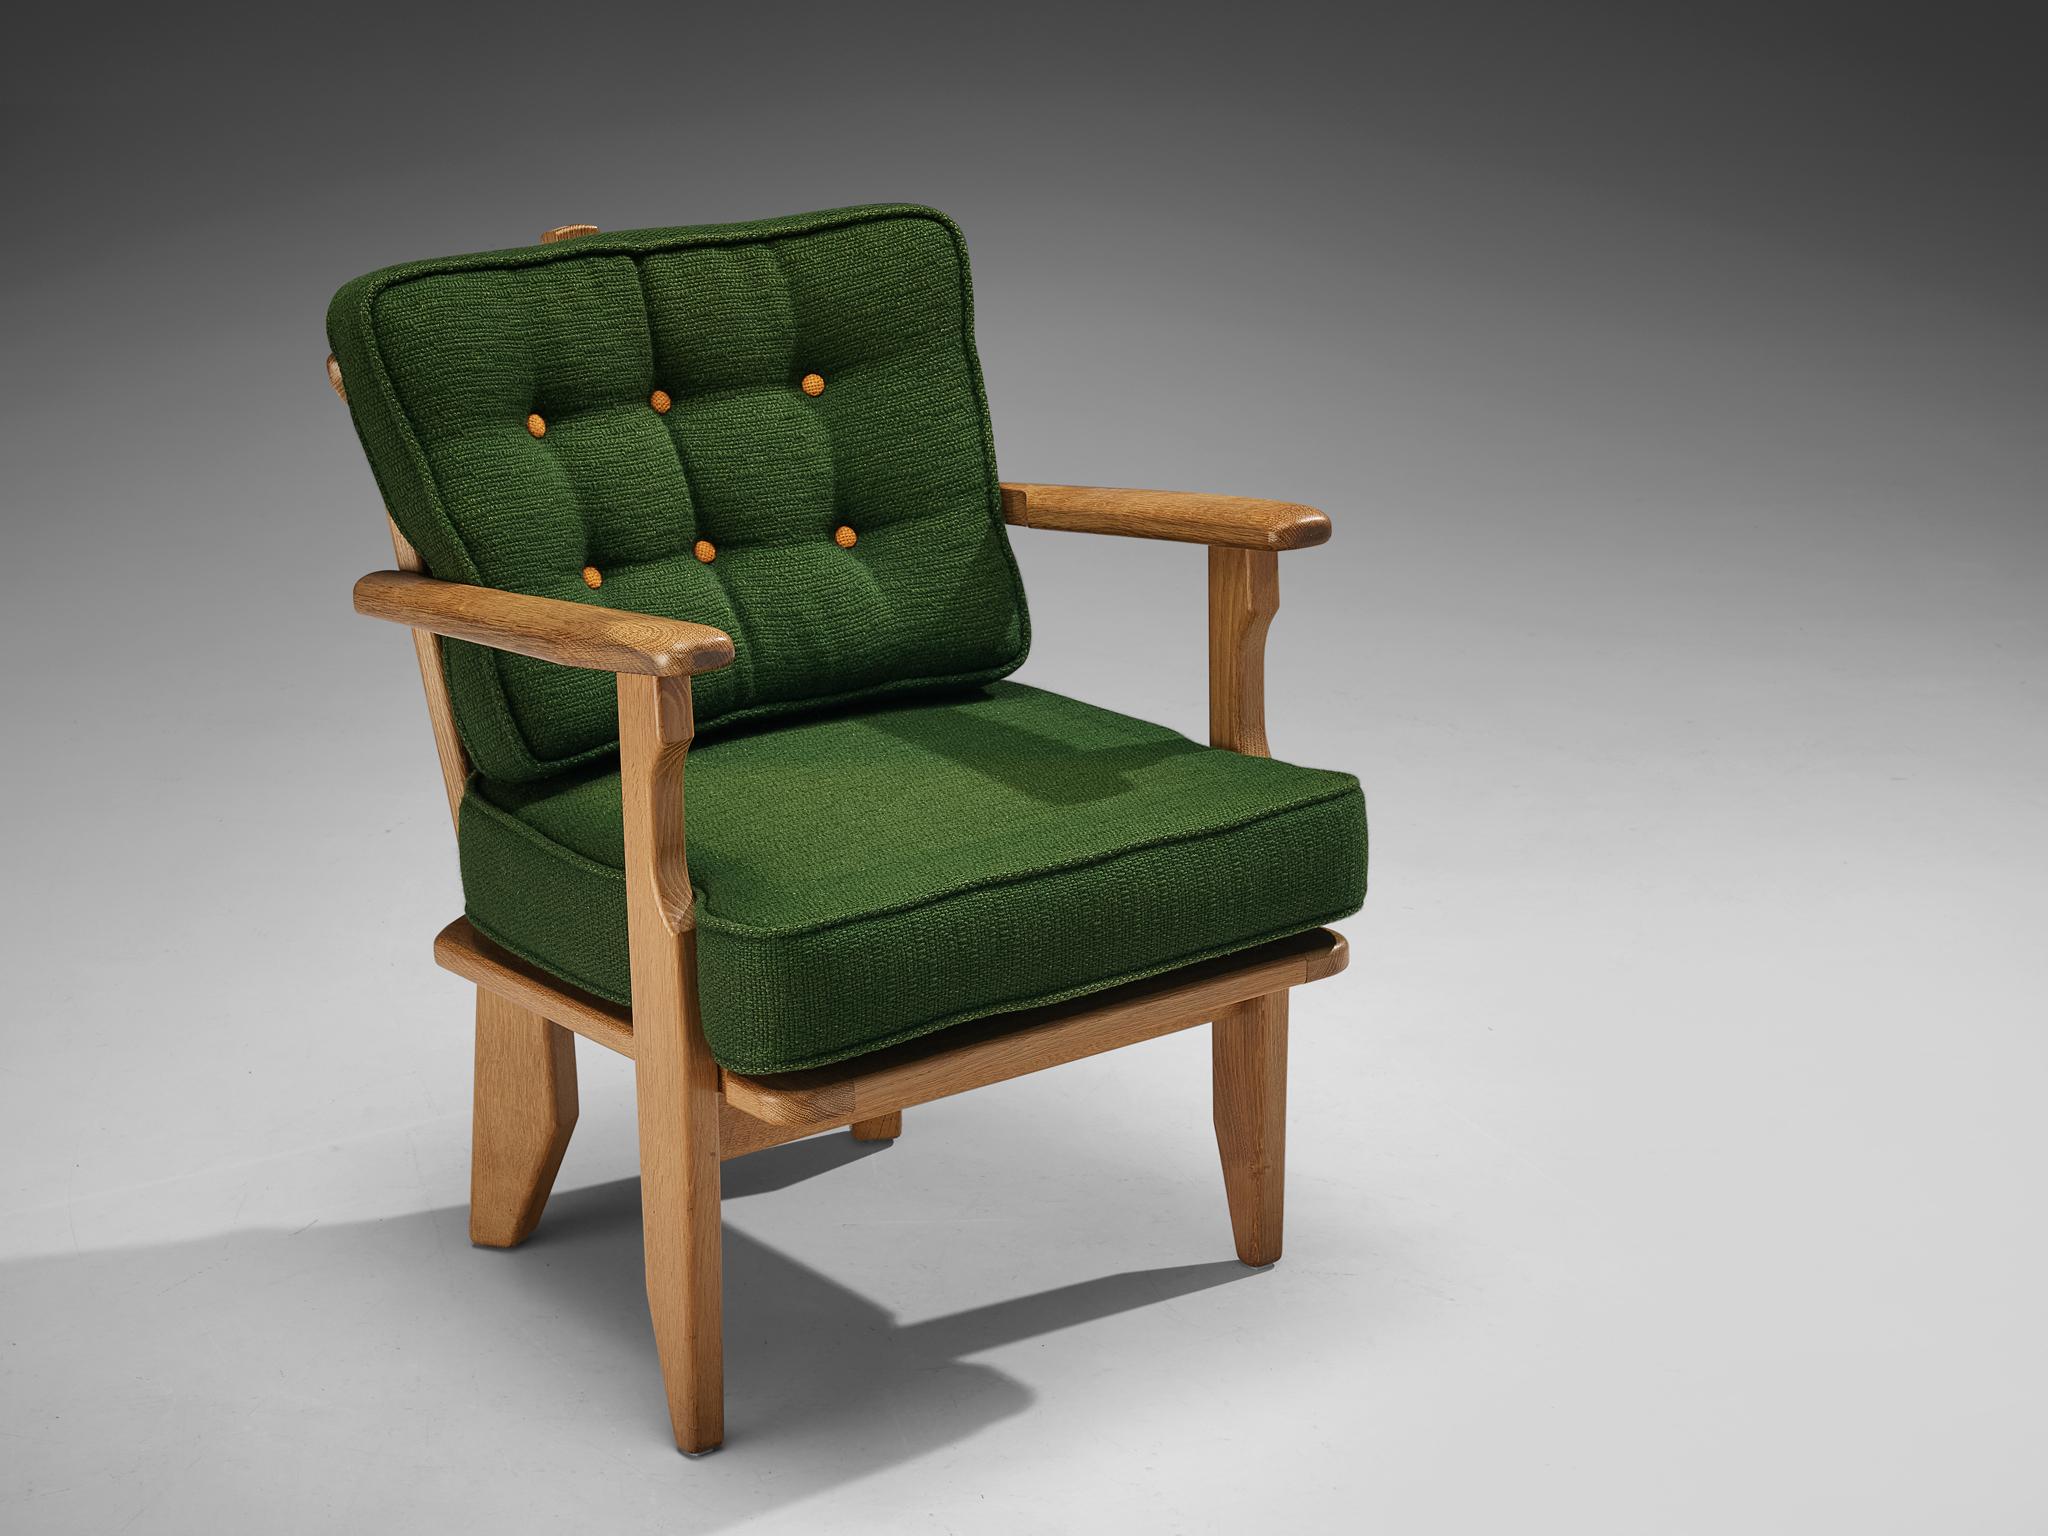 Guillerme et Chambron for Votre Maison, lounge chair, oak, fabric, France, 1960s

A sculptural easy chair by Guillerme and Chambron that is very well executed and made of solid, carved oak. This armchair feature an interesting open construction,